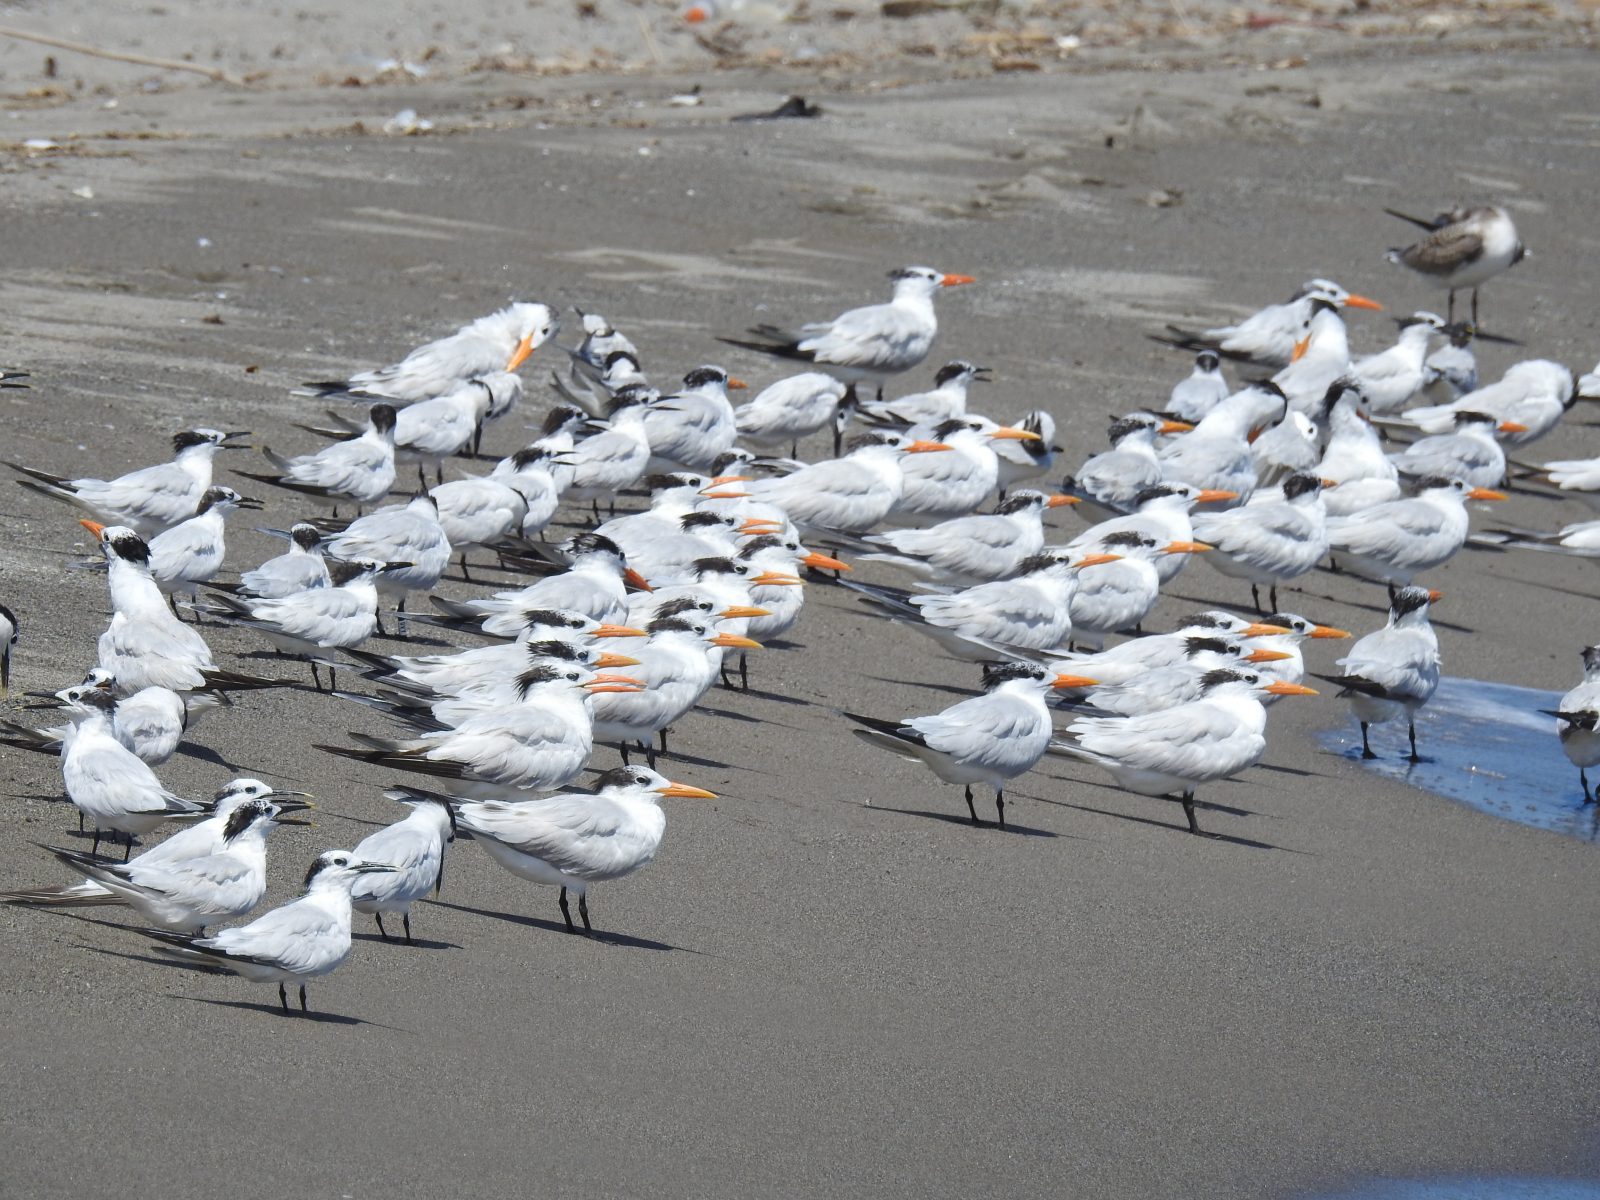 A juvenile royal tern with a field readable band (banded in 2020 on Ft. Wool) can be seen amongst a flock of sandwich and royal royal terns near the mouth of the Cangrejal River in Honduras.